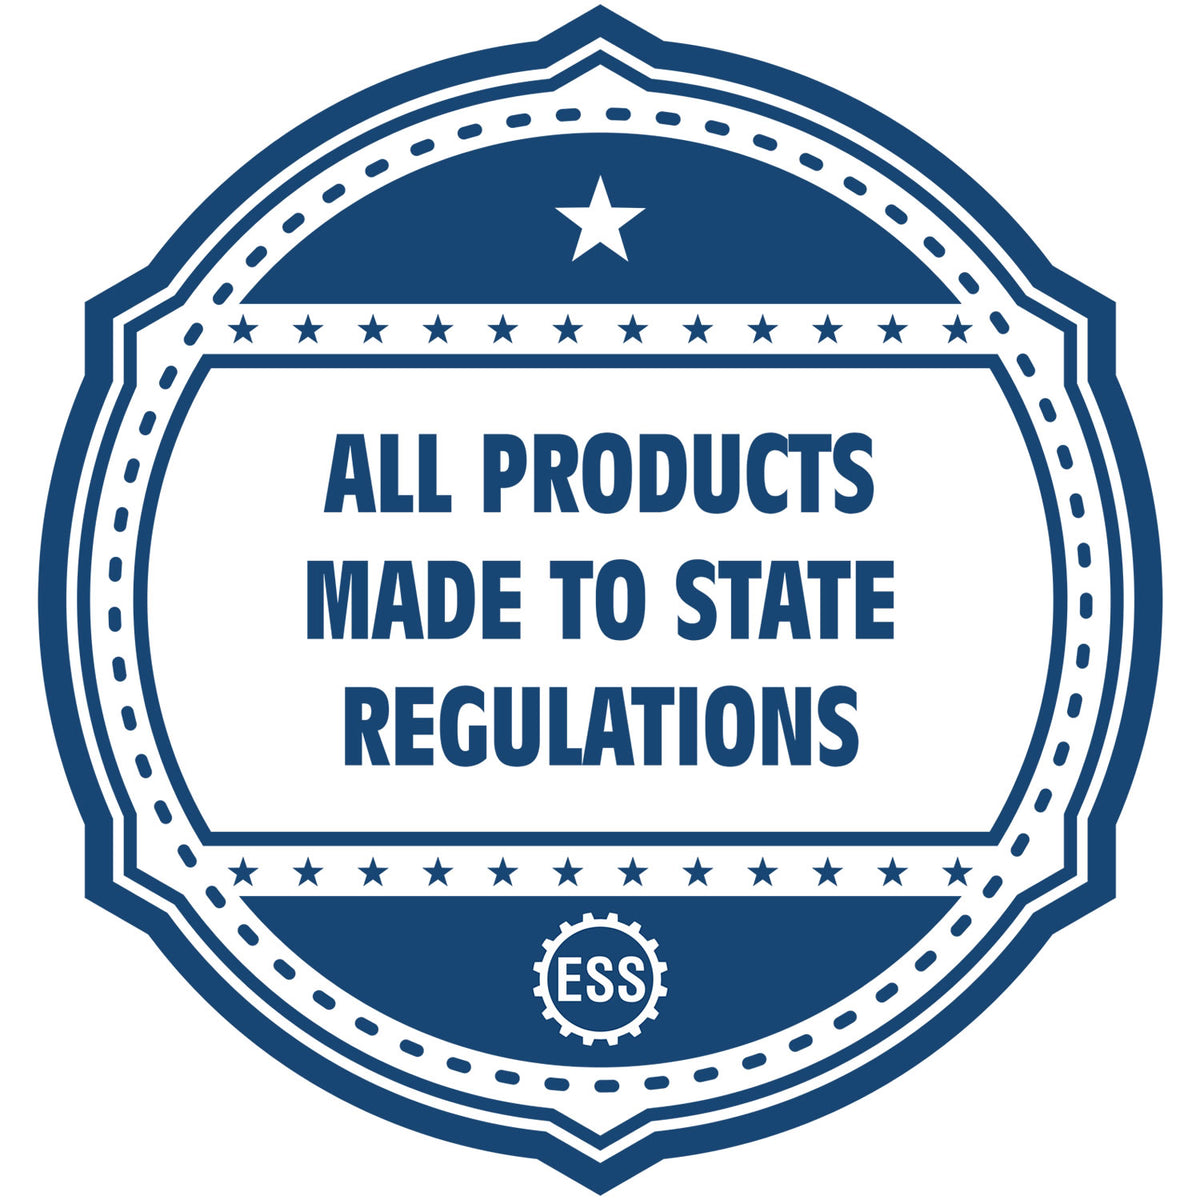 An icon or badge element for the Digital Mississippi PE Stamp and Electronic Seal for Mississippi Engineer showing that this product is made in compliance with state regulations.